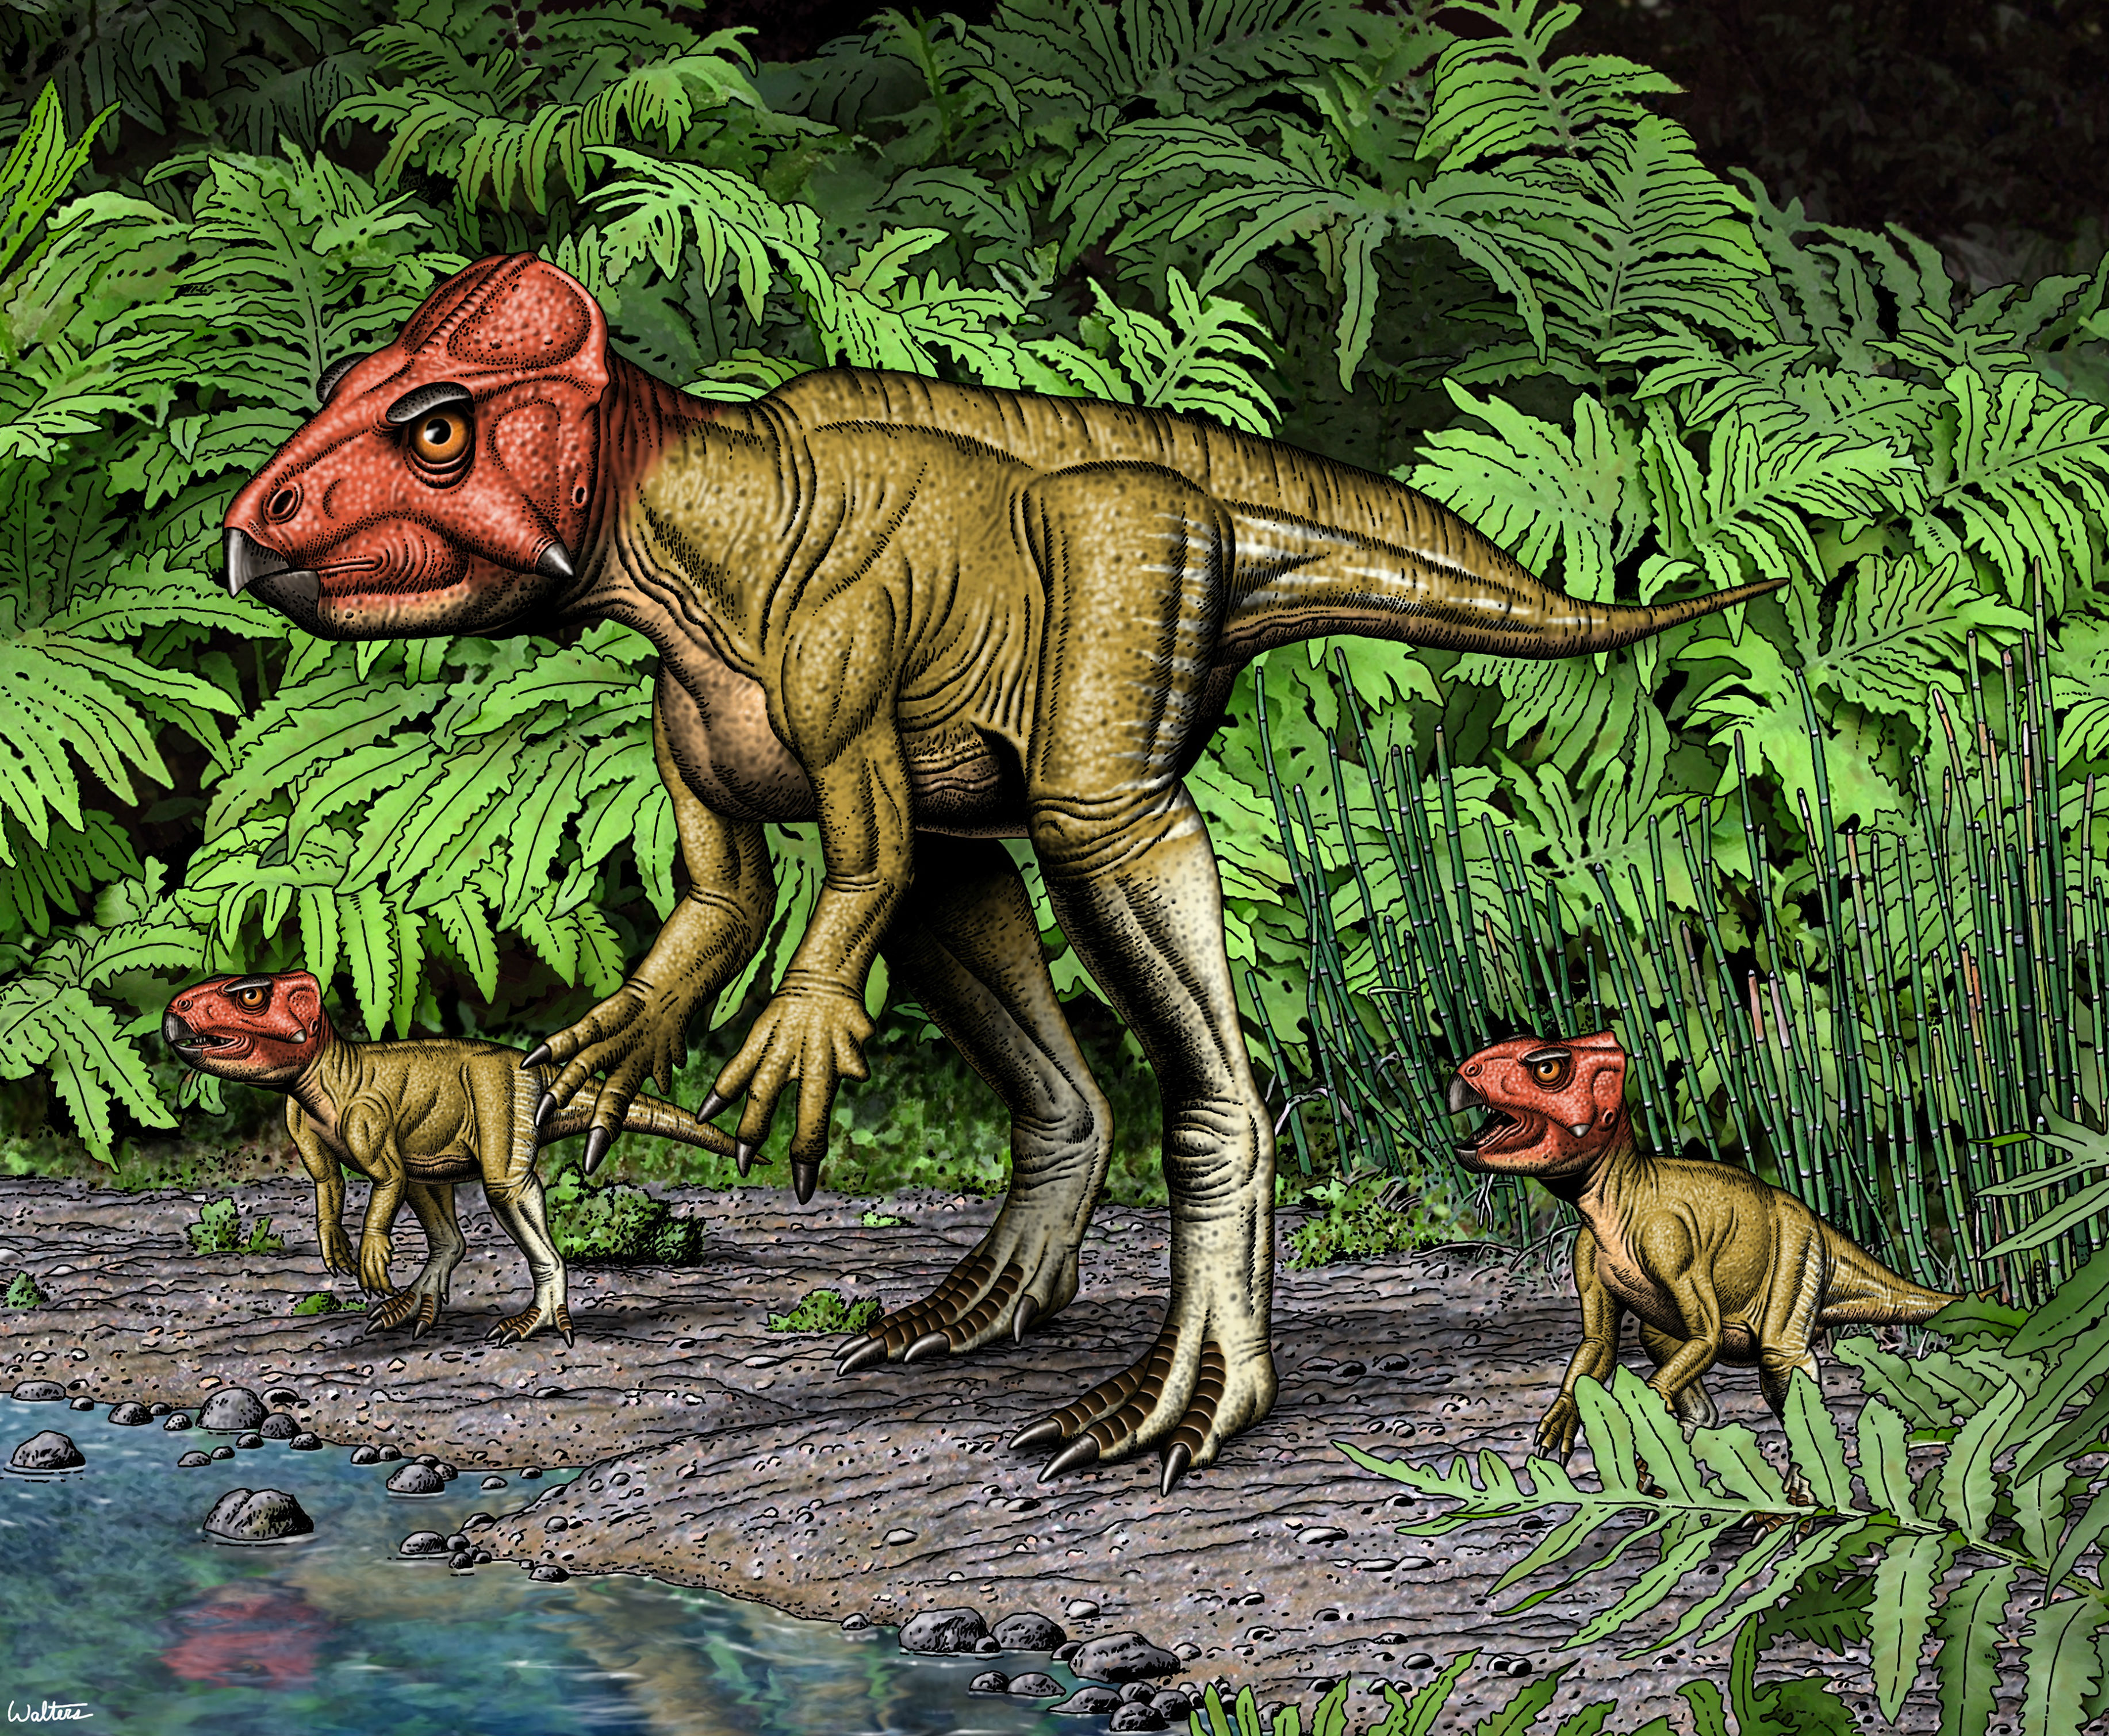 adult dinosaur with frill on skull characterized by penn paleontologists is standing on two legs and flanked by two smaller dinosaurs on the water's edge